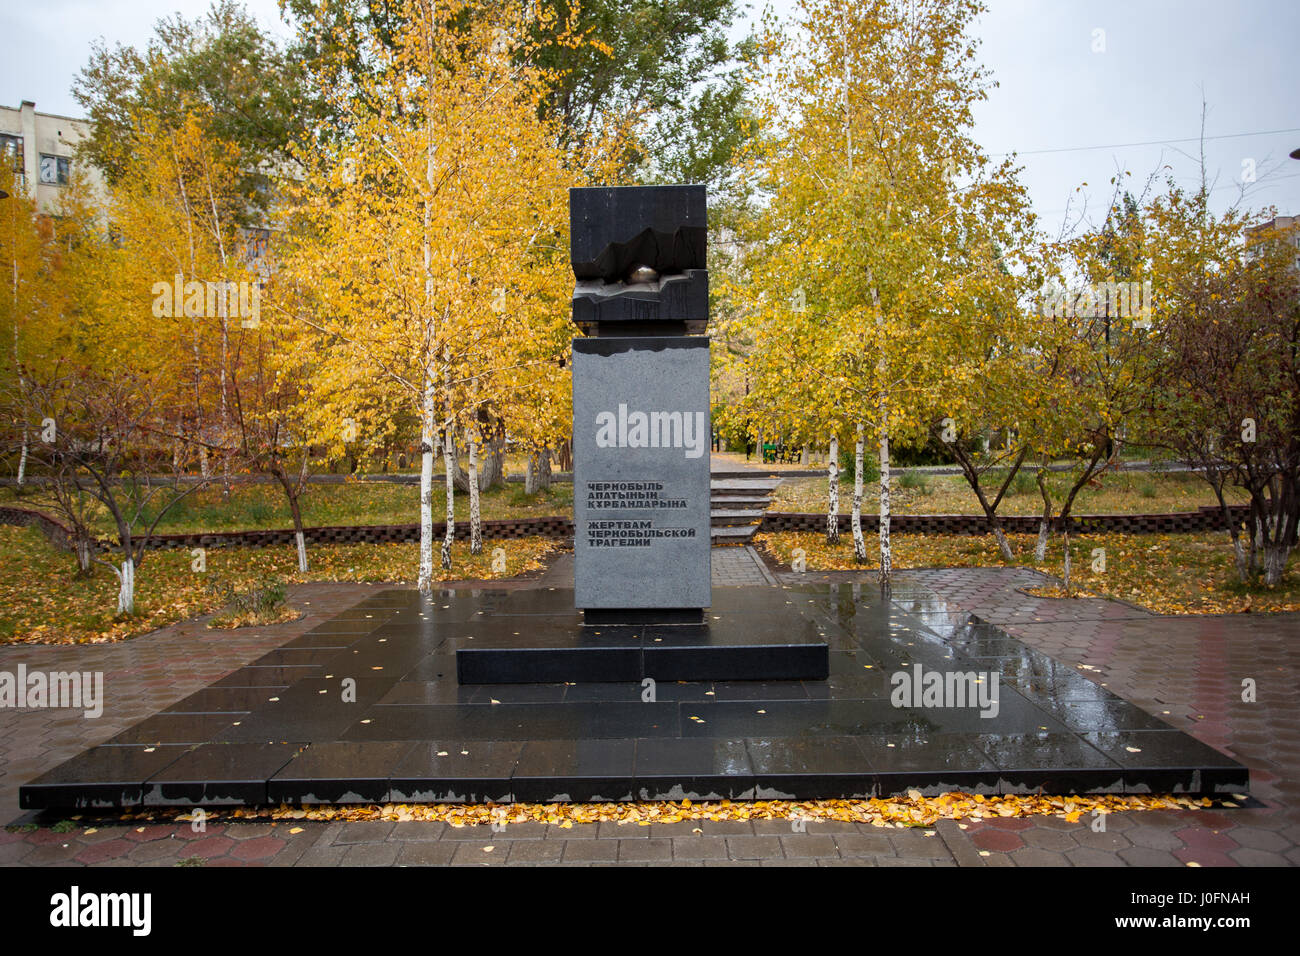 Monument to the victims of the Chernobyl tragedy. The photo was taken in Astana, the capital of Kazakhstan. Stock Photo